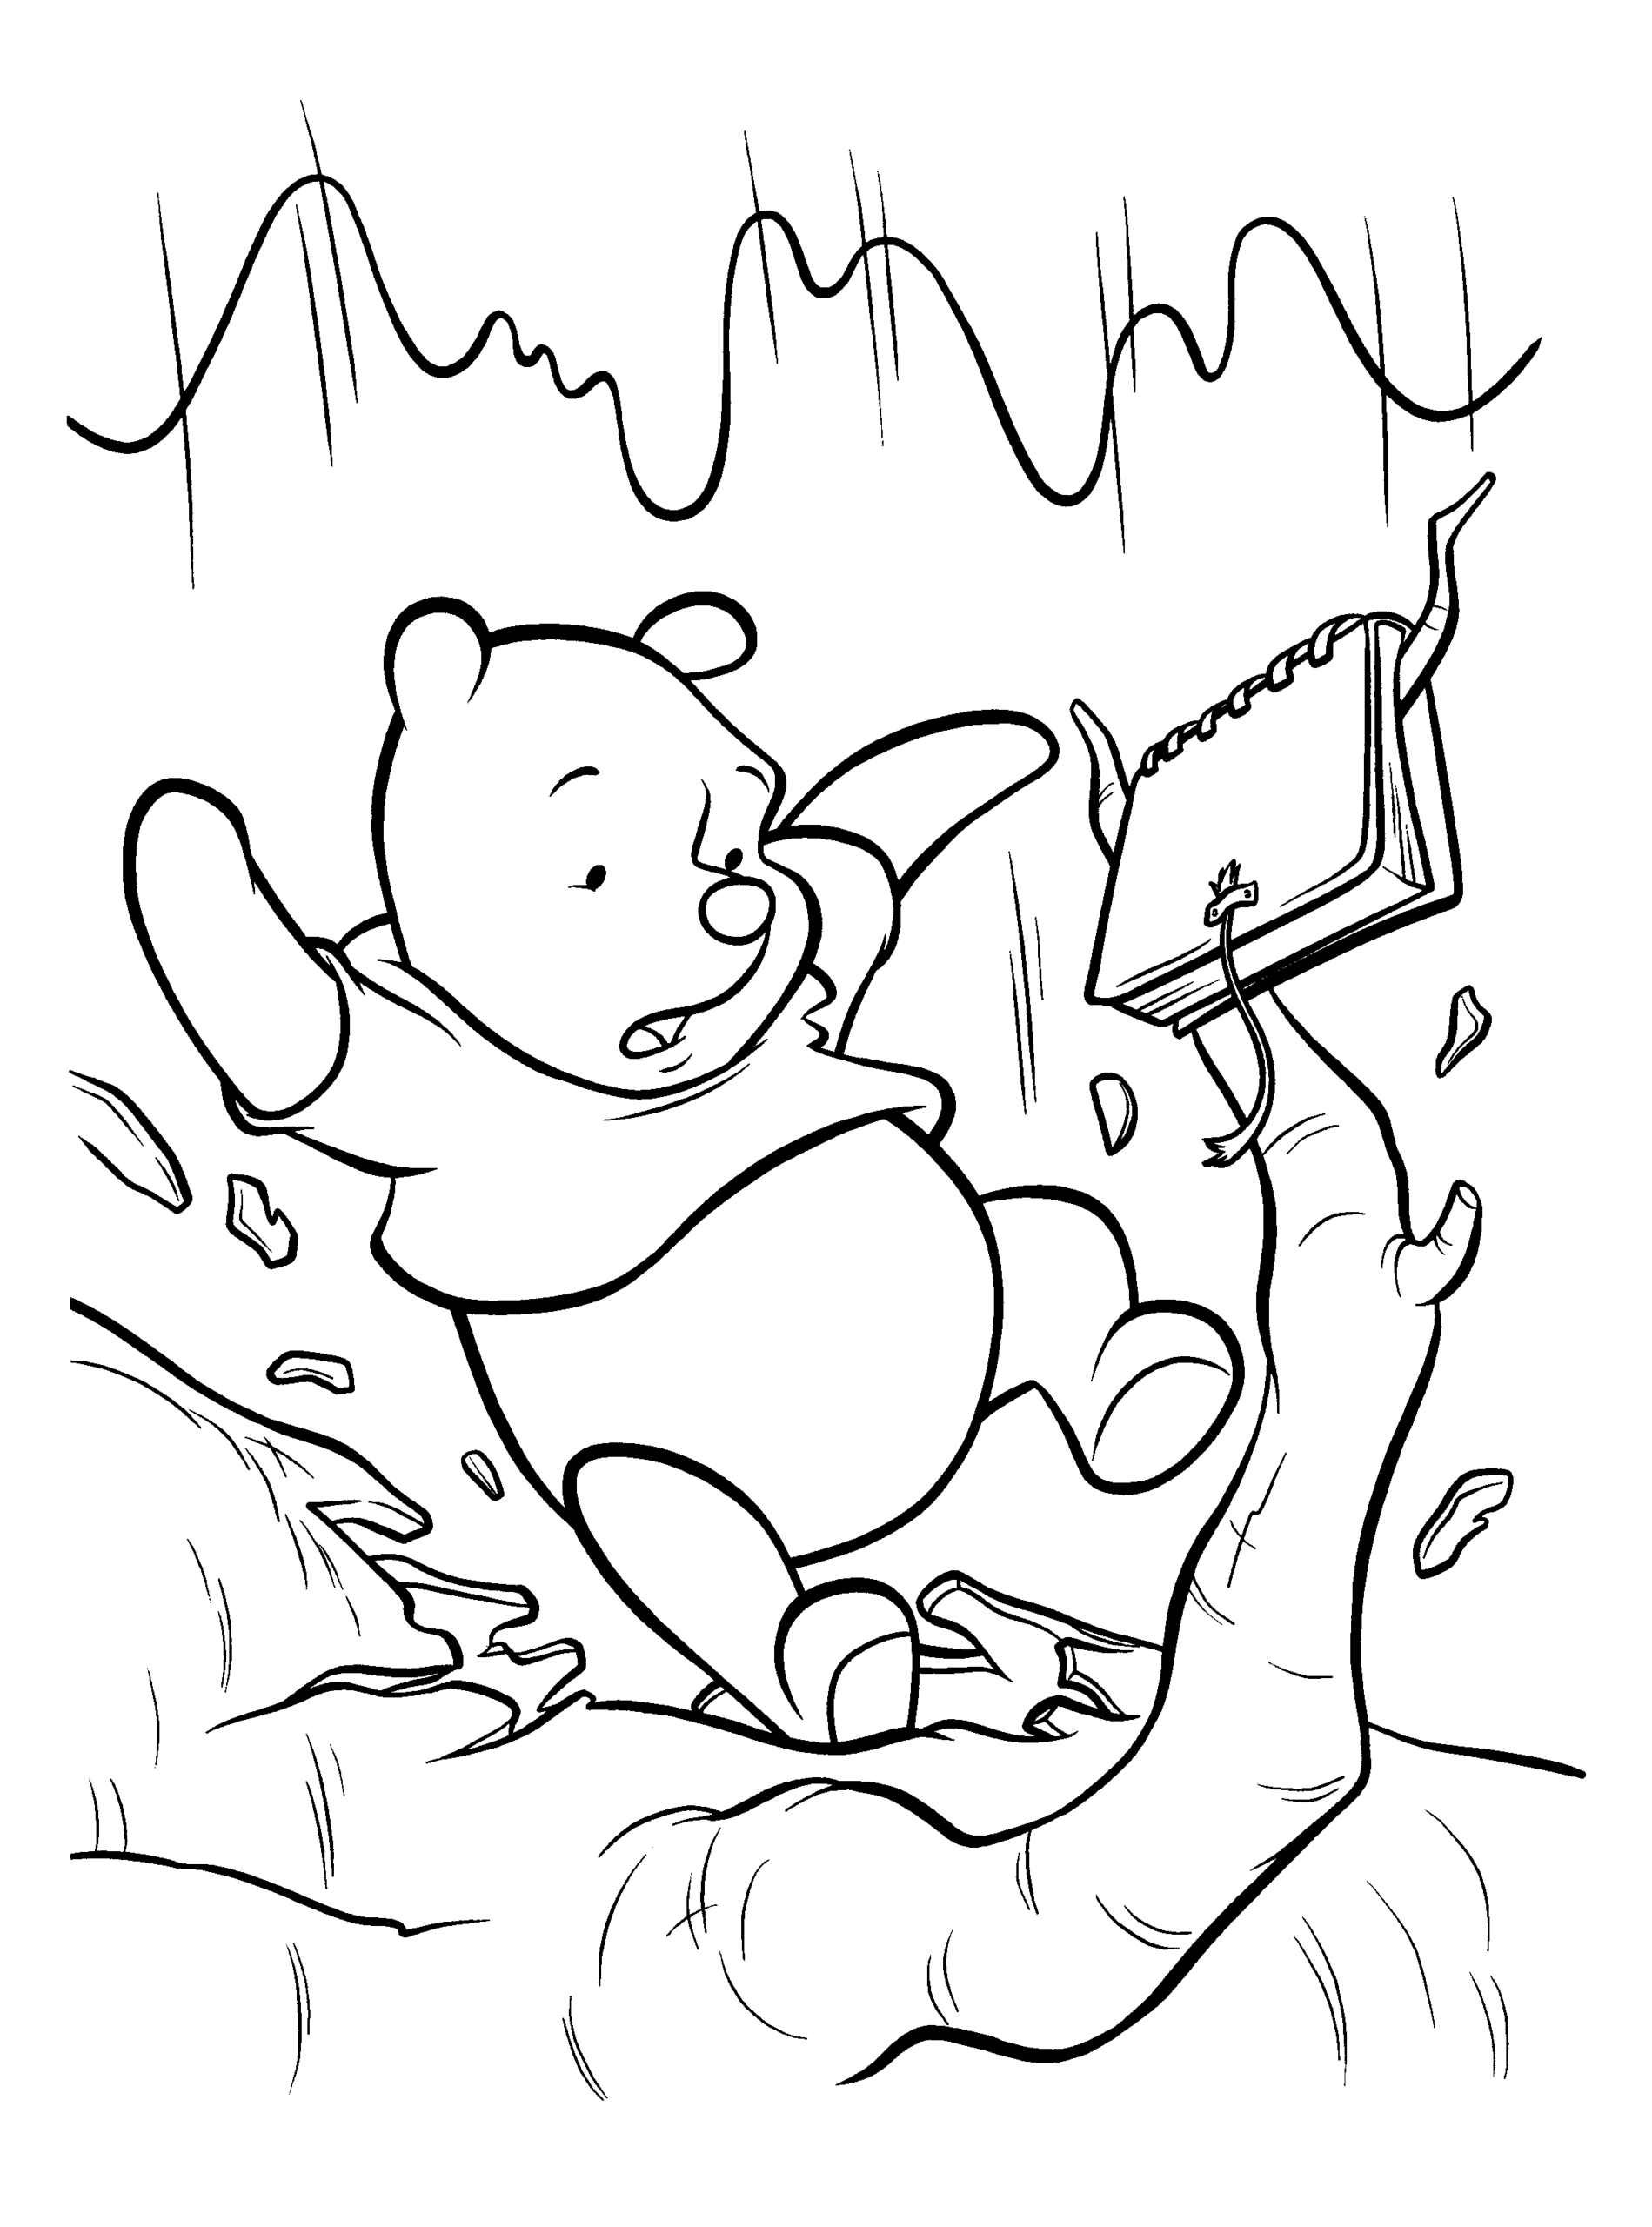 Winnie the Pooh Coloring Pages Cartoons winnie the pooh 7 Printable 2020 7187 Coloring4free